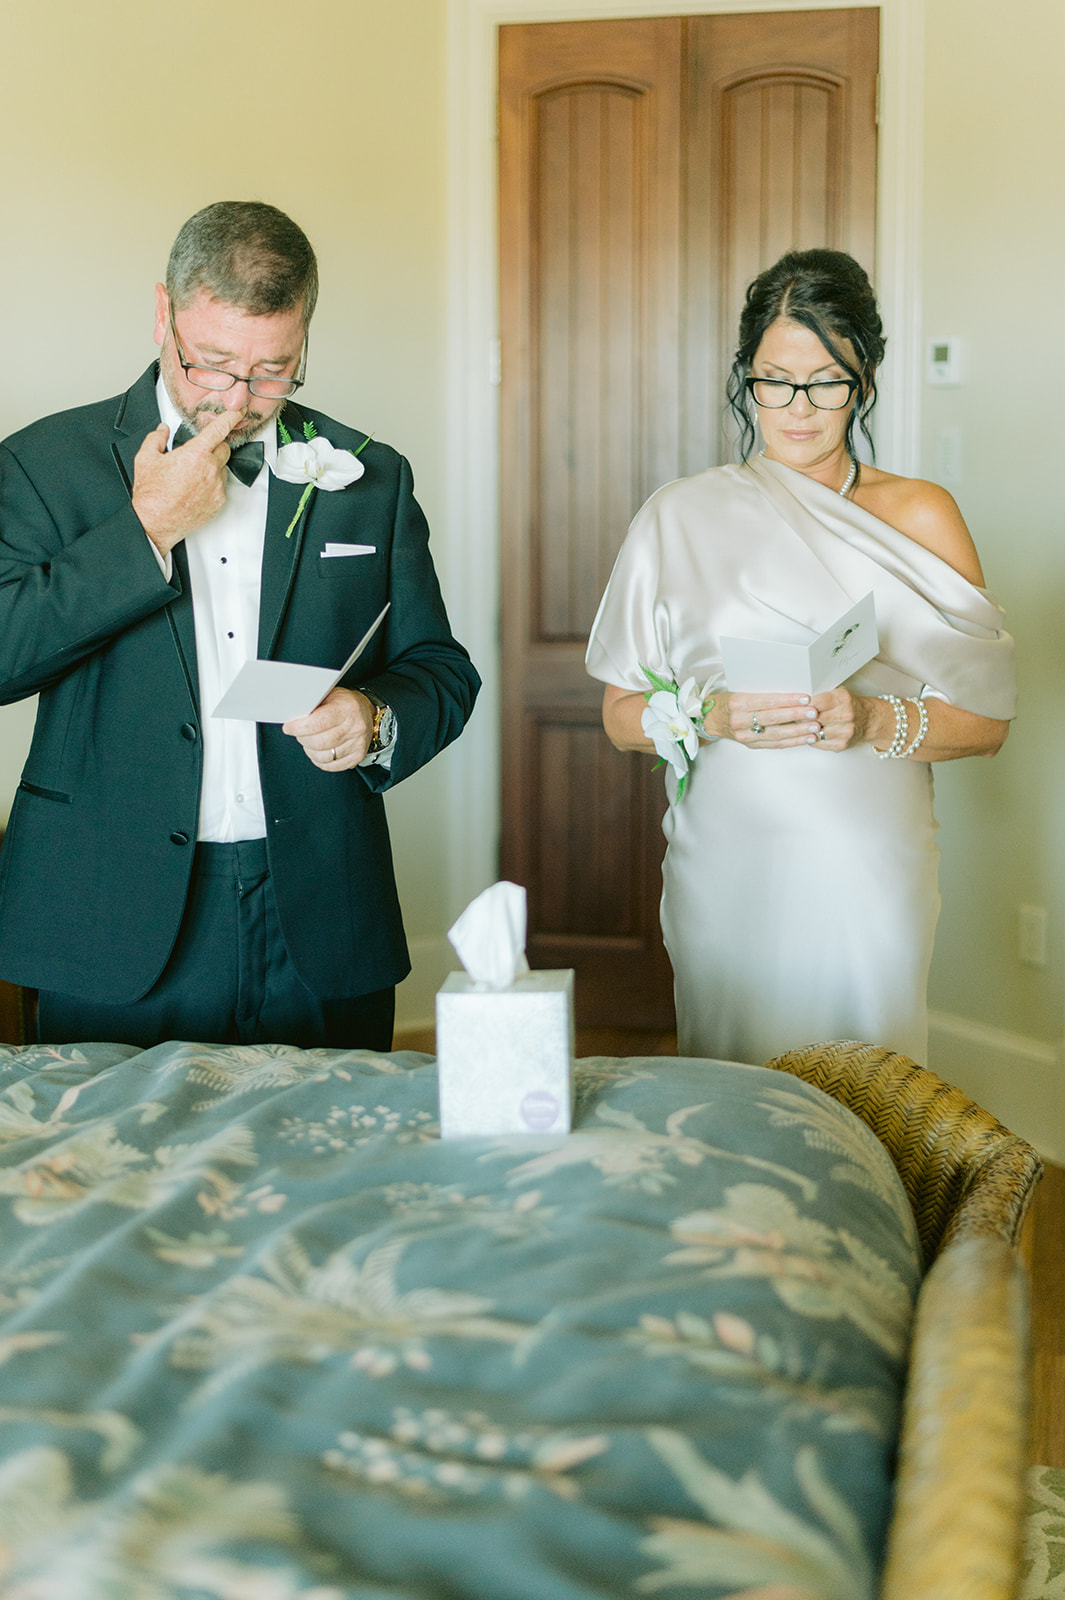 Expert Marco Island Wedding Photographer for Your Big Day - Flawless Memories
